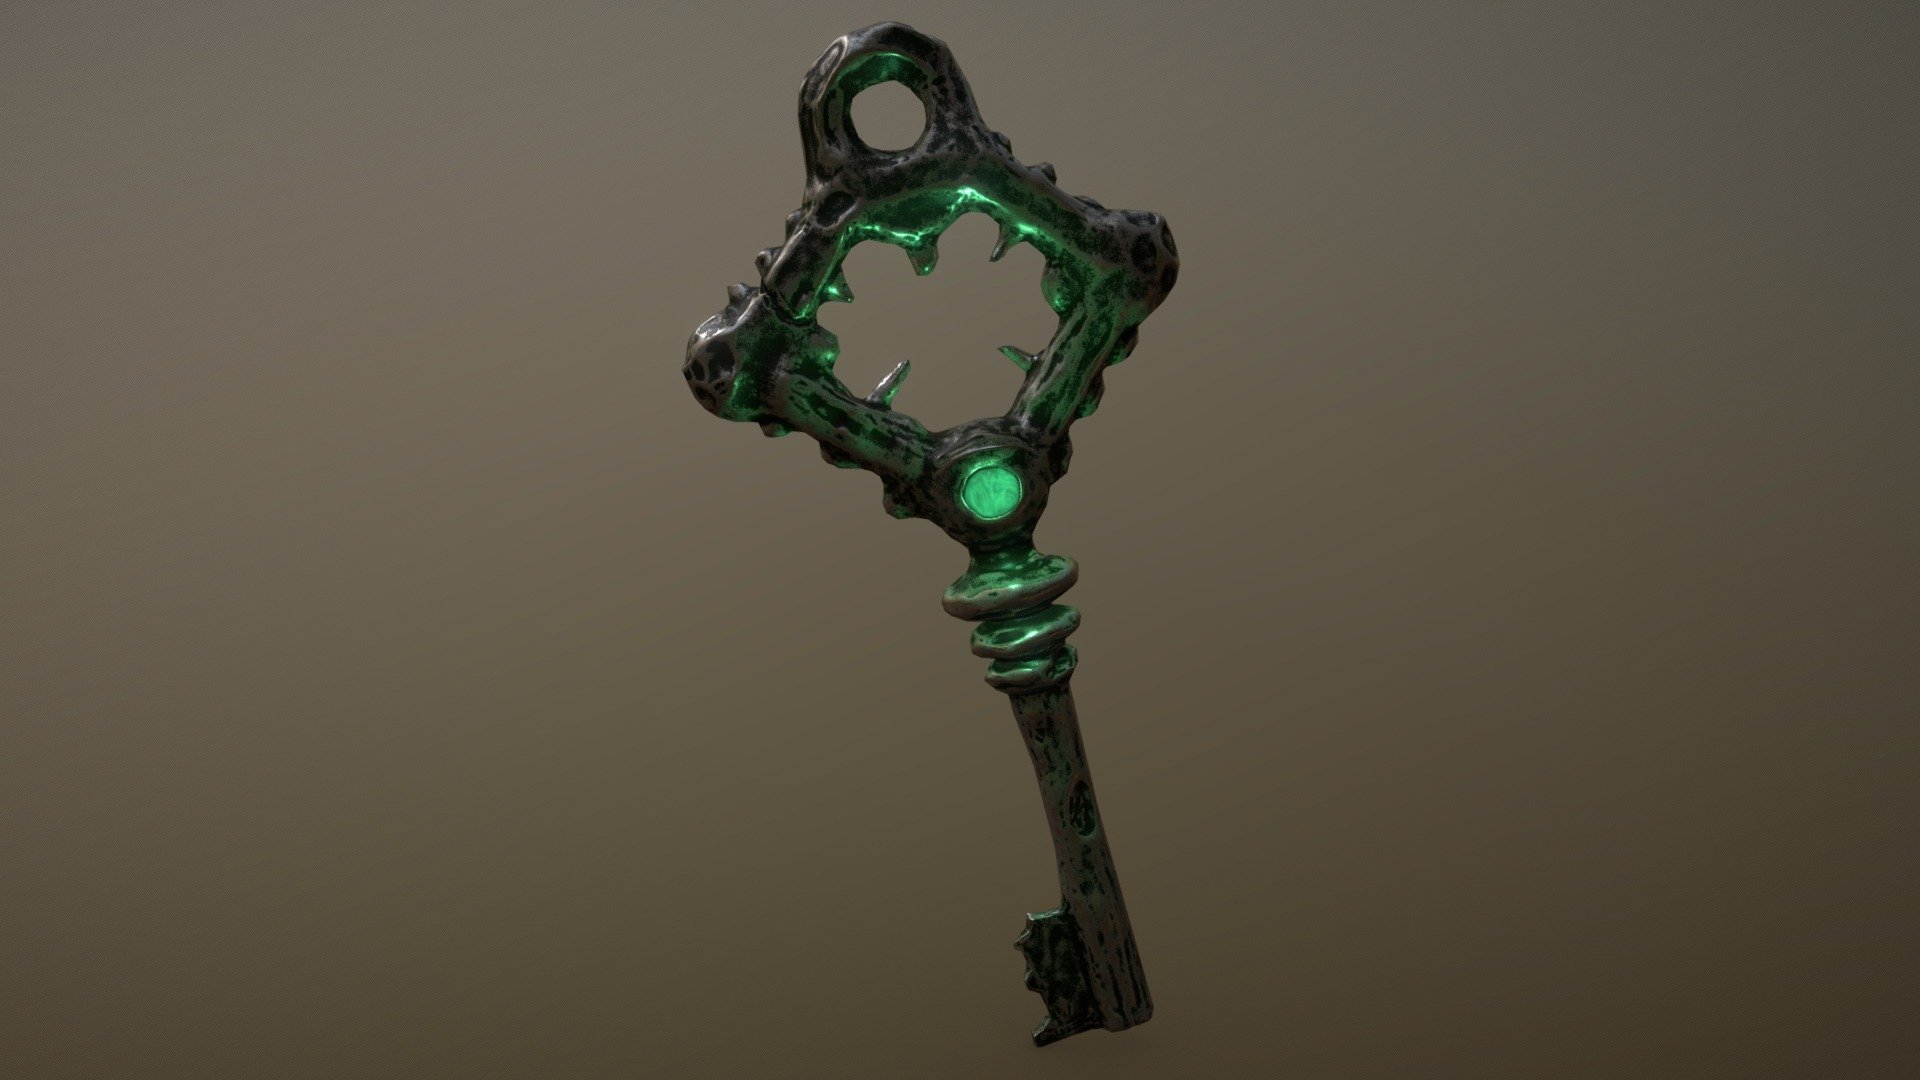 A lowpoly(-ish) model of a magic key, with a glowing gem.

More about this model:
https://www.artstation.com/artwork/58qA5w - Magic Key - Download Free 3D model by unfa 3d model